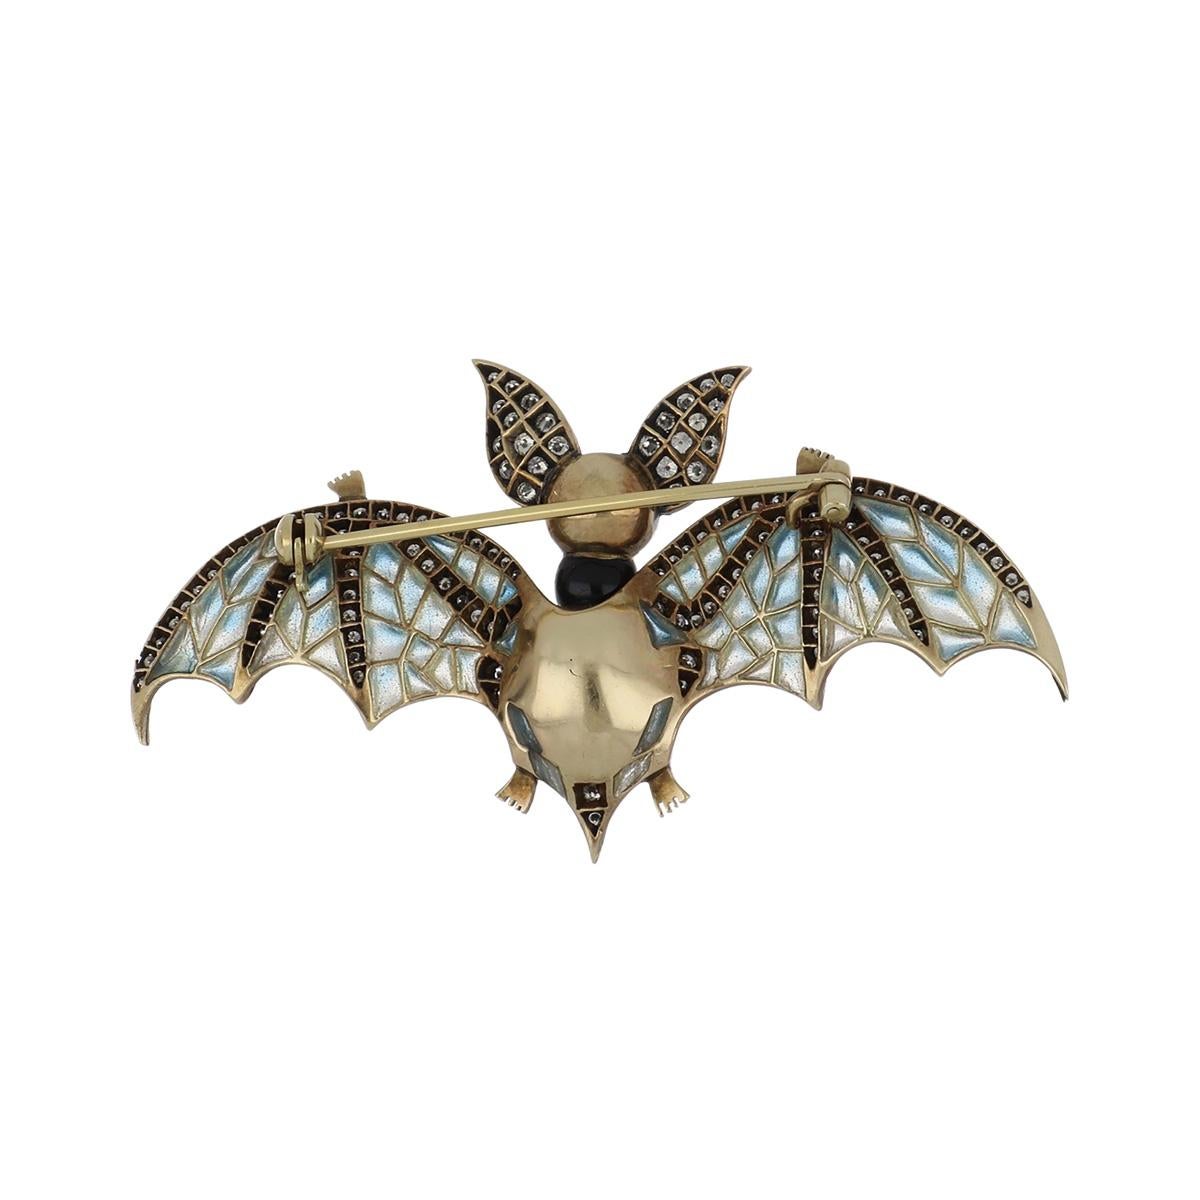 Estate 18K yellow gold cultured baroque Tahitian pearl and diamond bat pin. Created in Art Nouveau style, the bat has plique-à-jour enamel wings and a movable head, set with ruby eyes. The pin is set with round diamonds totaling 1.75 total carat